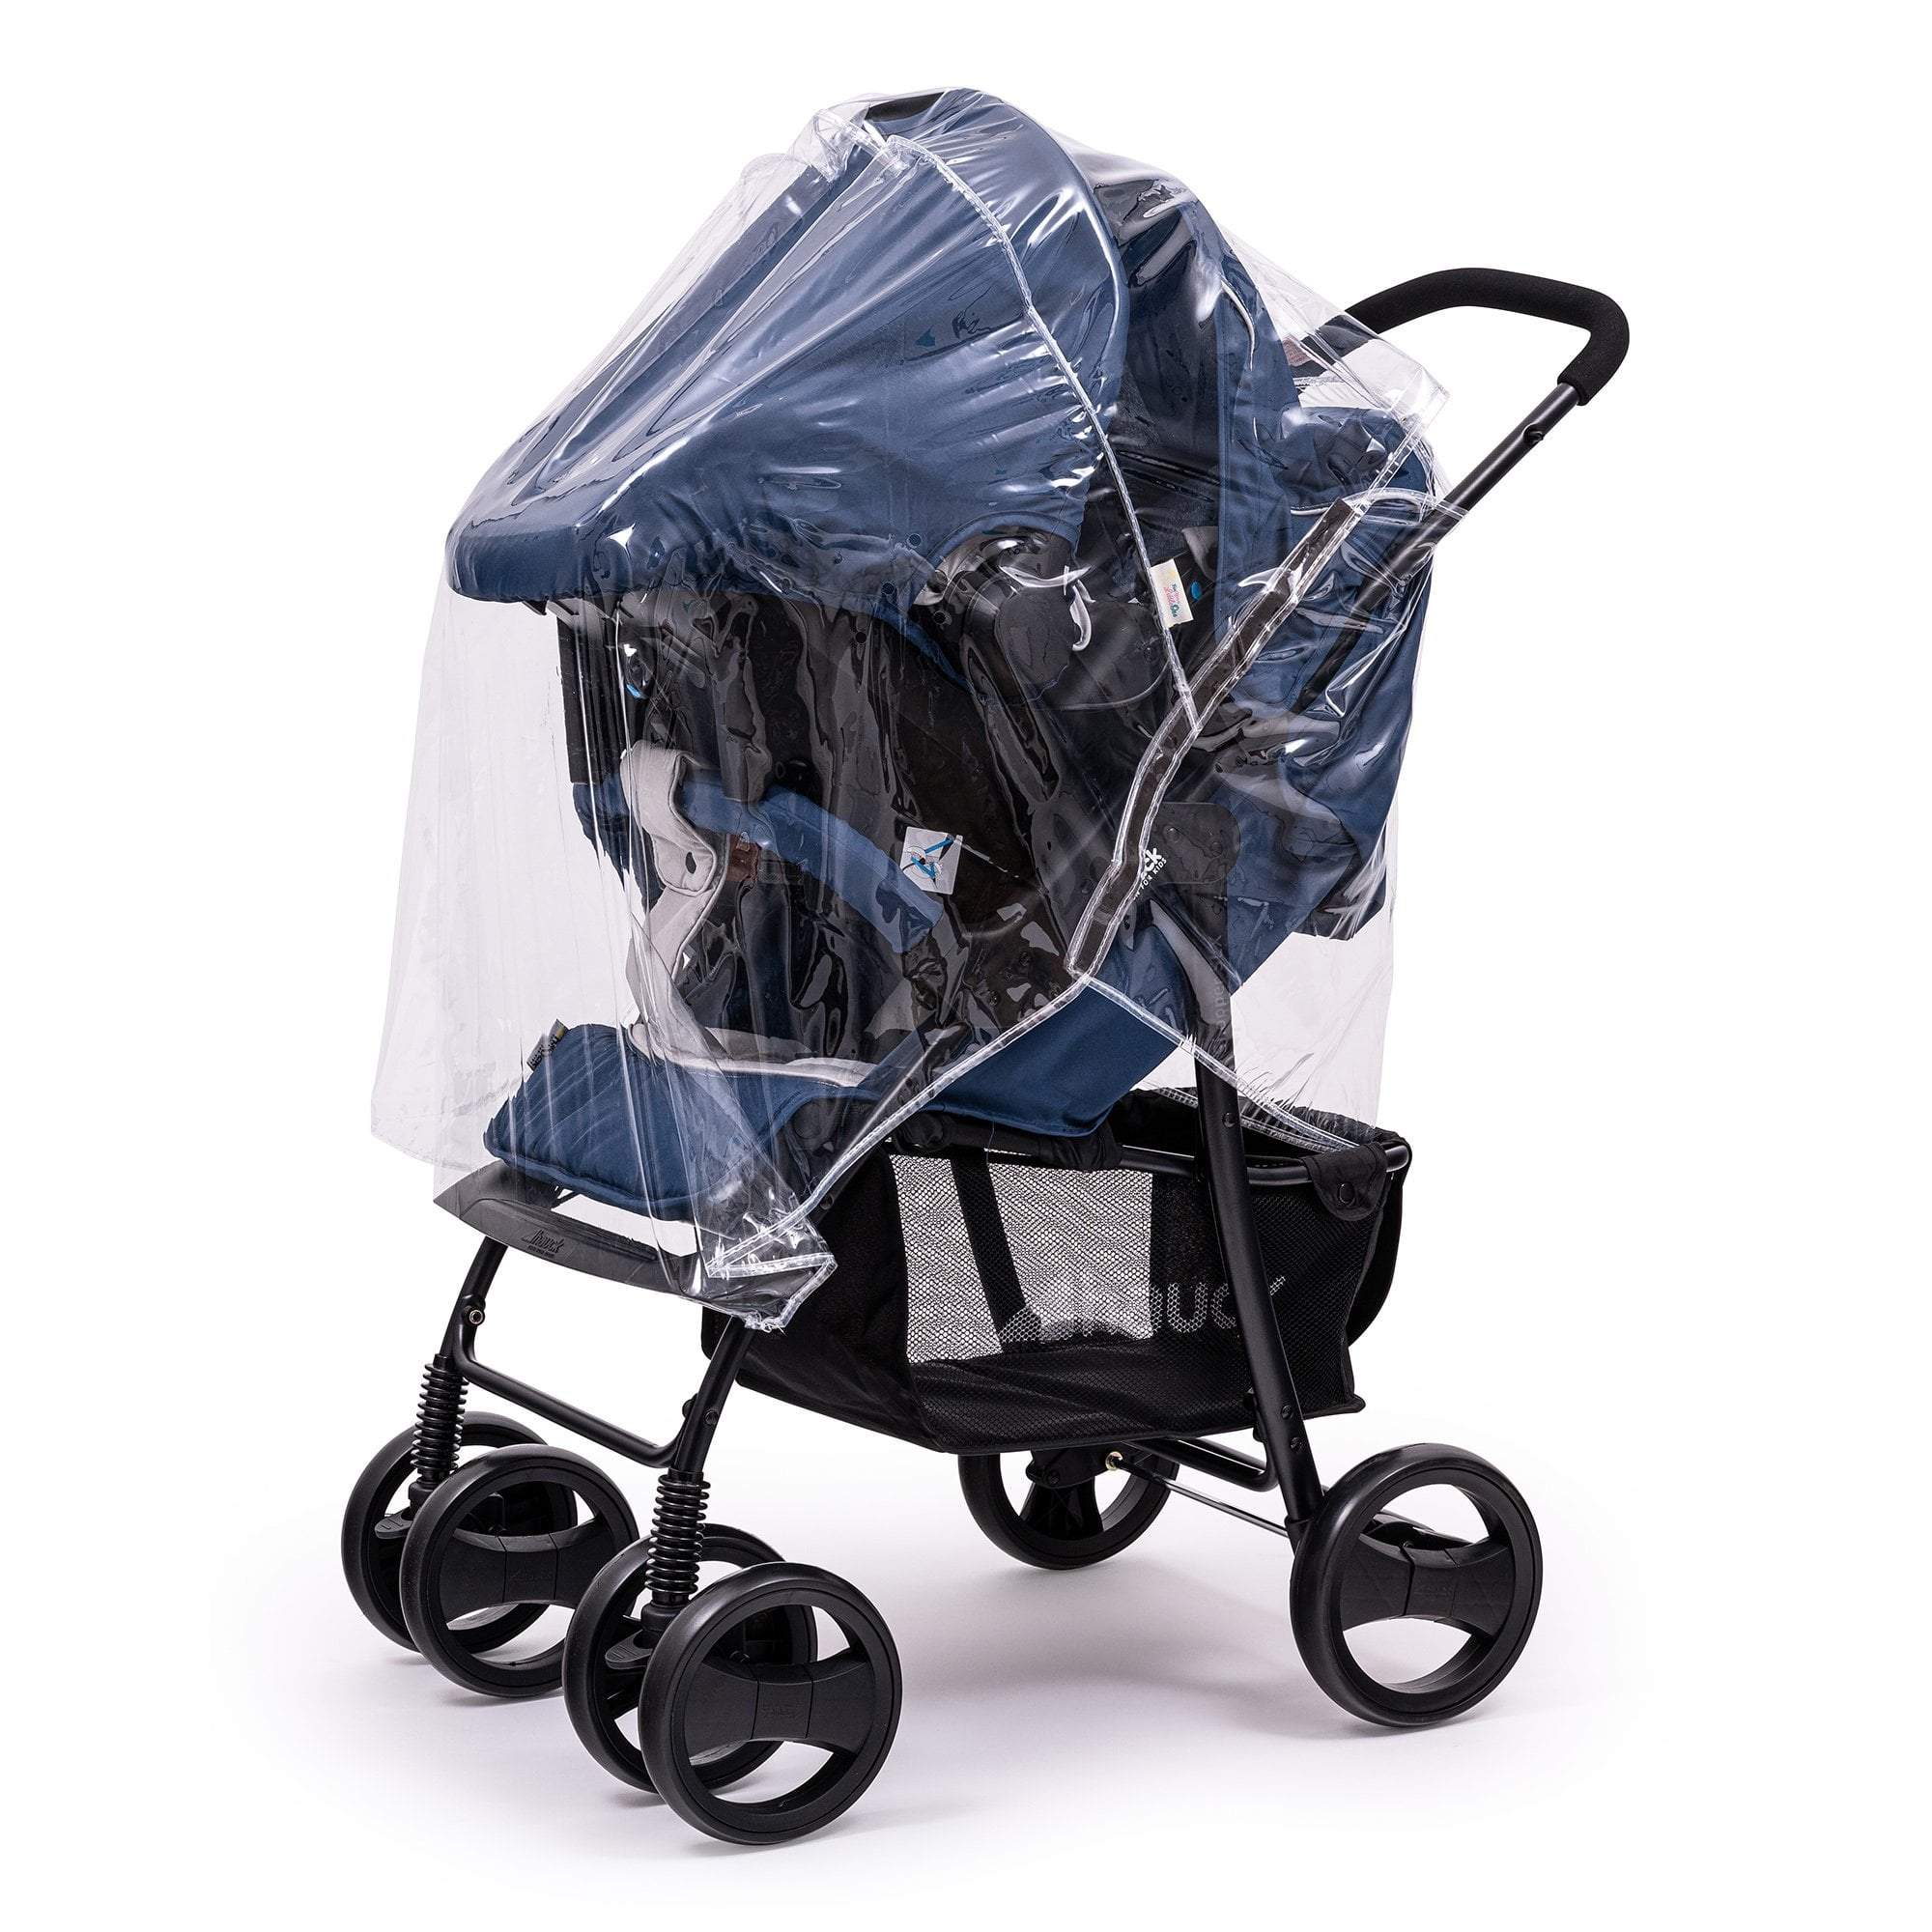 Travel System Raincover Compatible with NeoNato - Fits All Models - For Your Little One